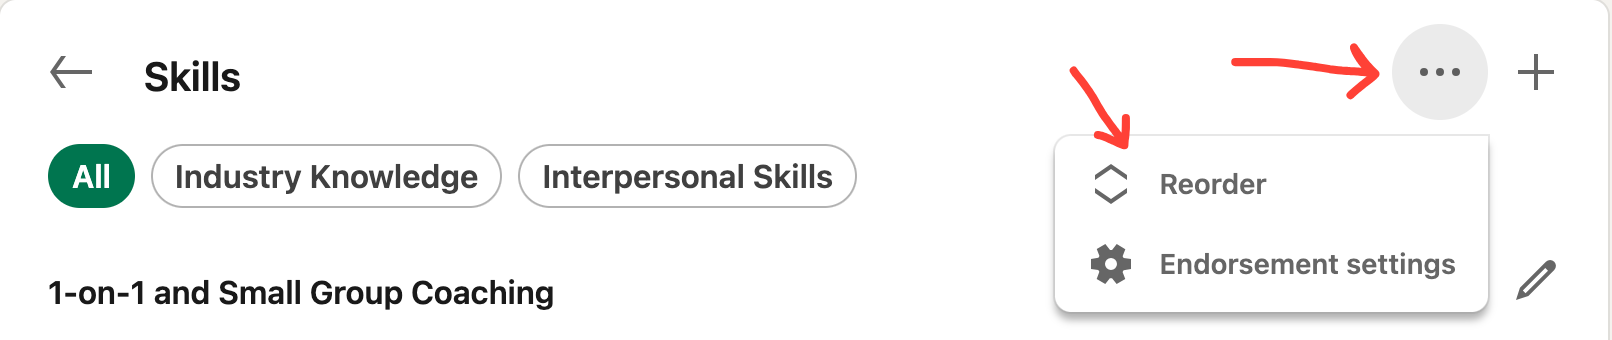 LinkedIn profile example showing the Skills section and how to change the order they are listed in